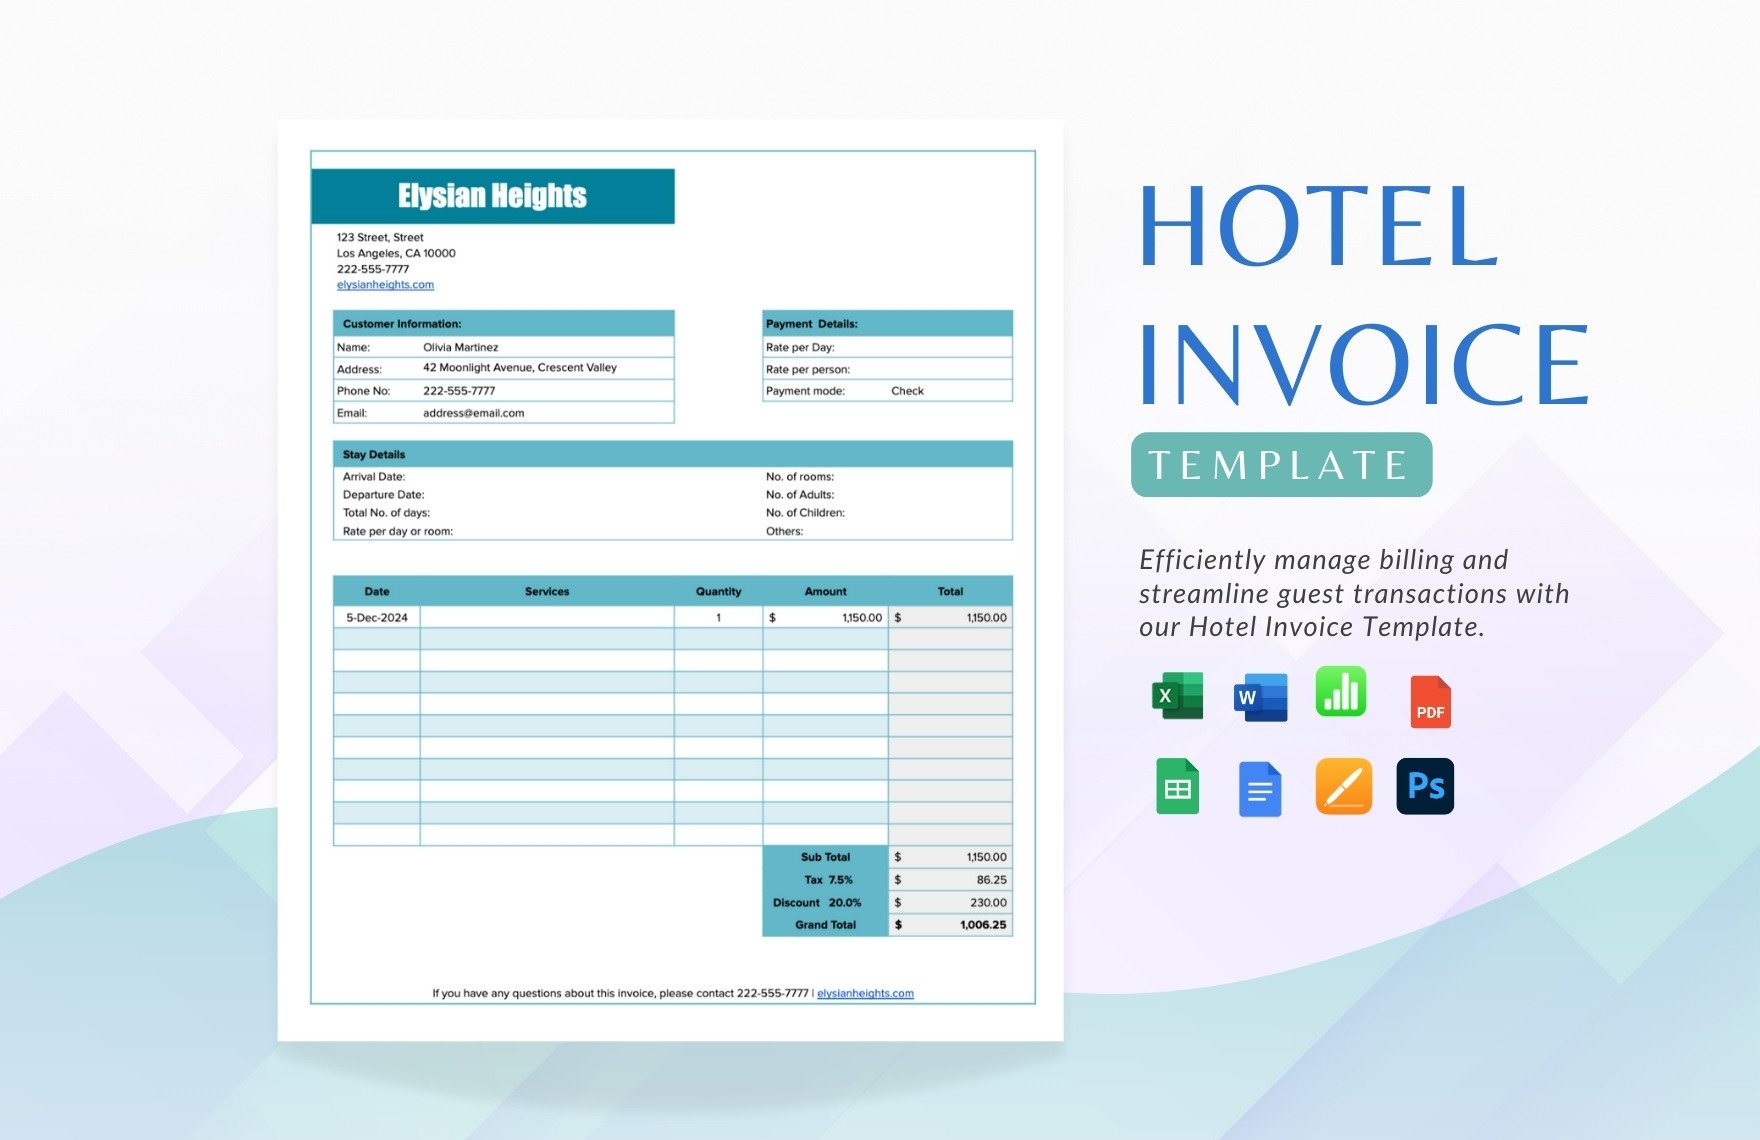 Hotel Invoice Template in Word, Google Docs, Excel, PDF, Google Sheets, PSD, Apple Pages, Apple Numbers